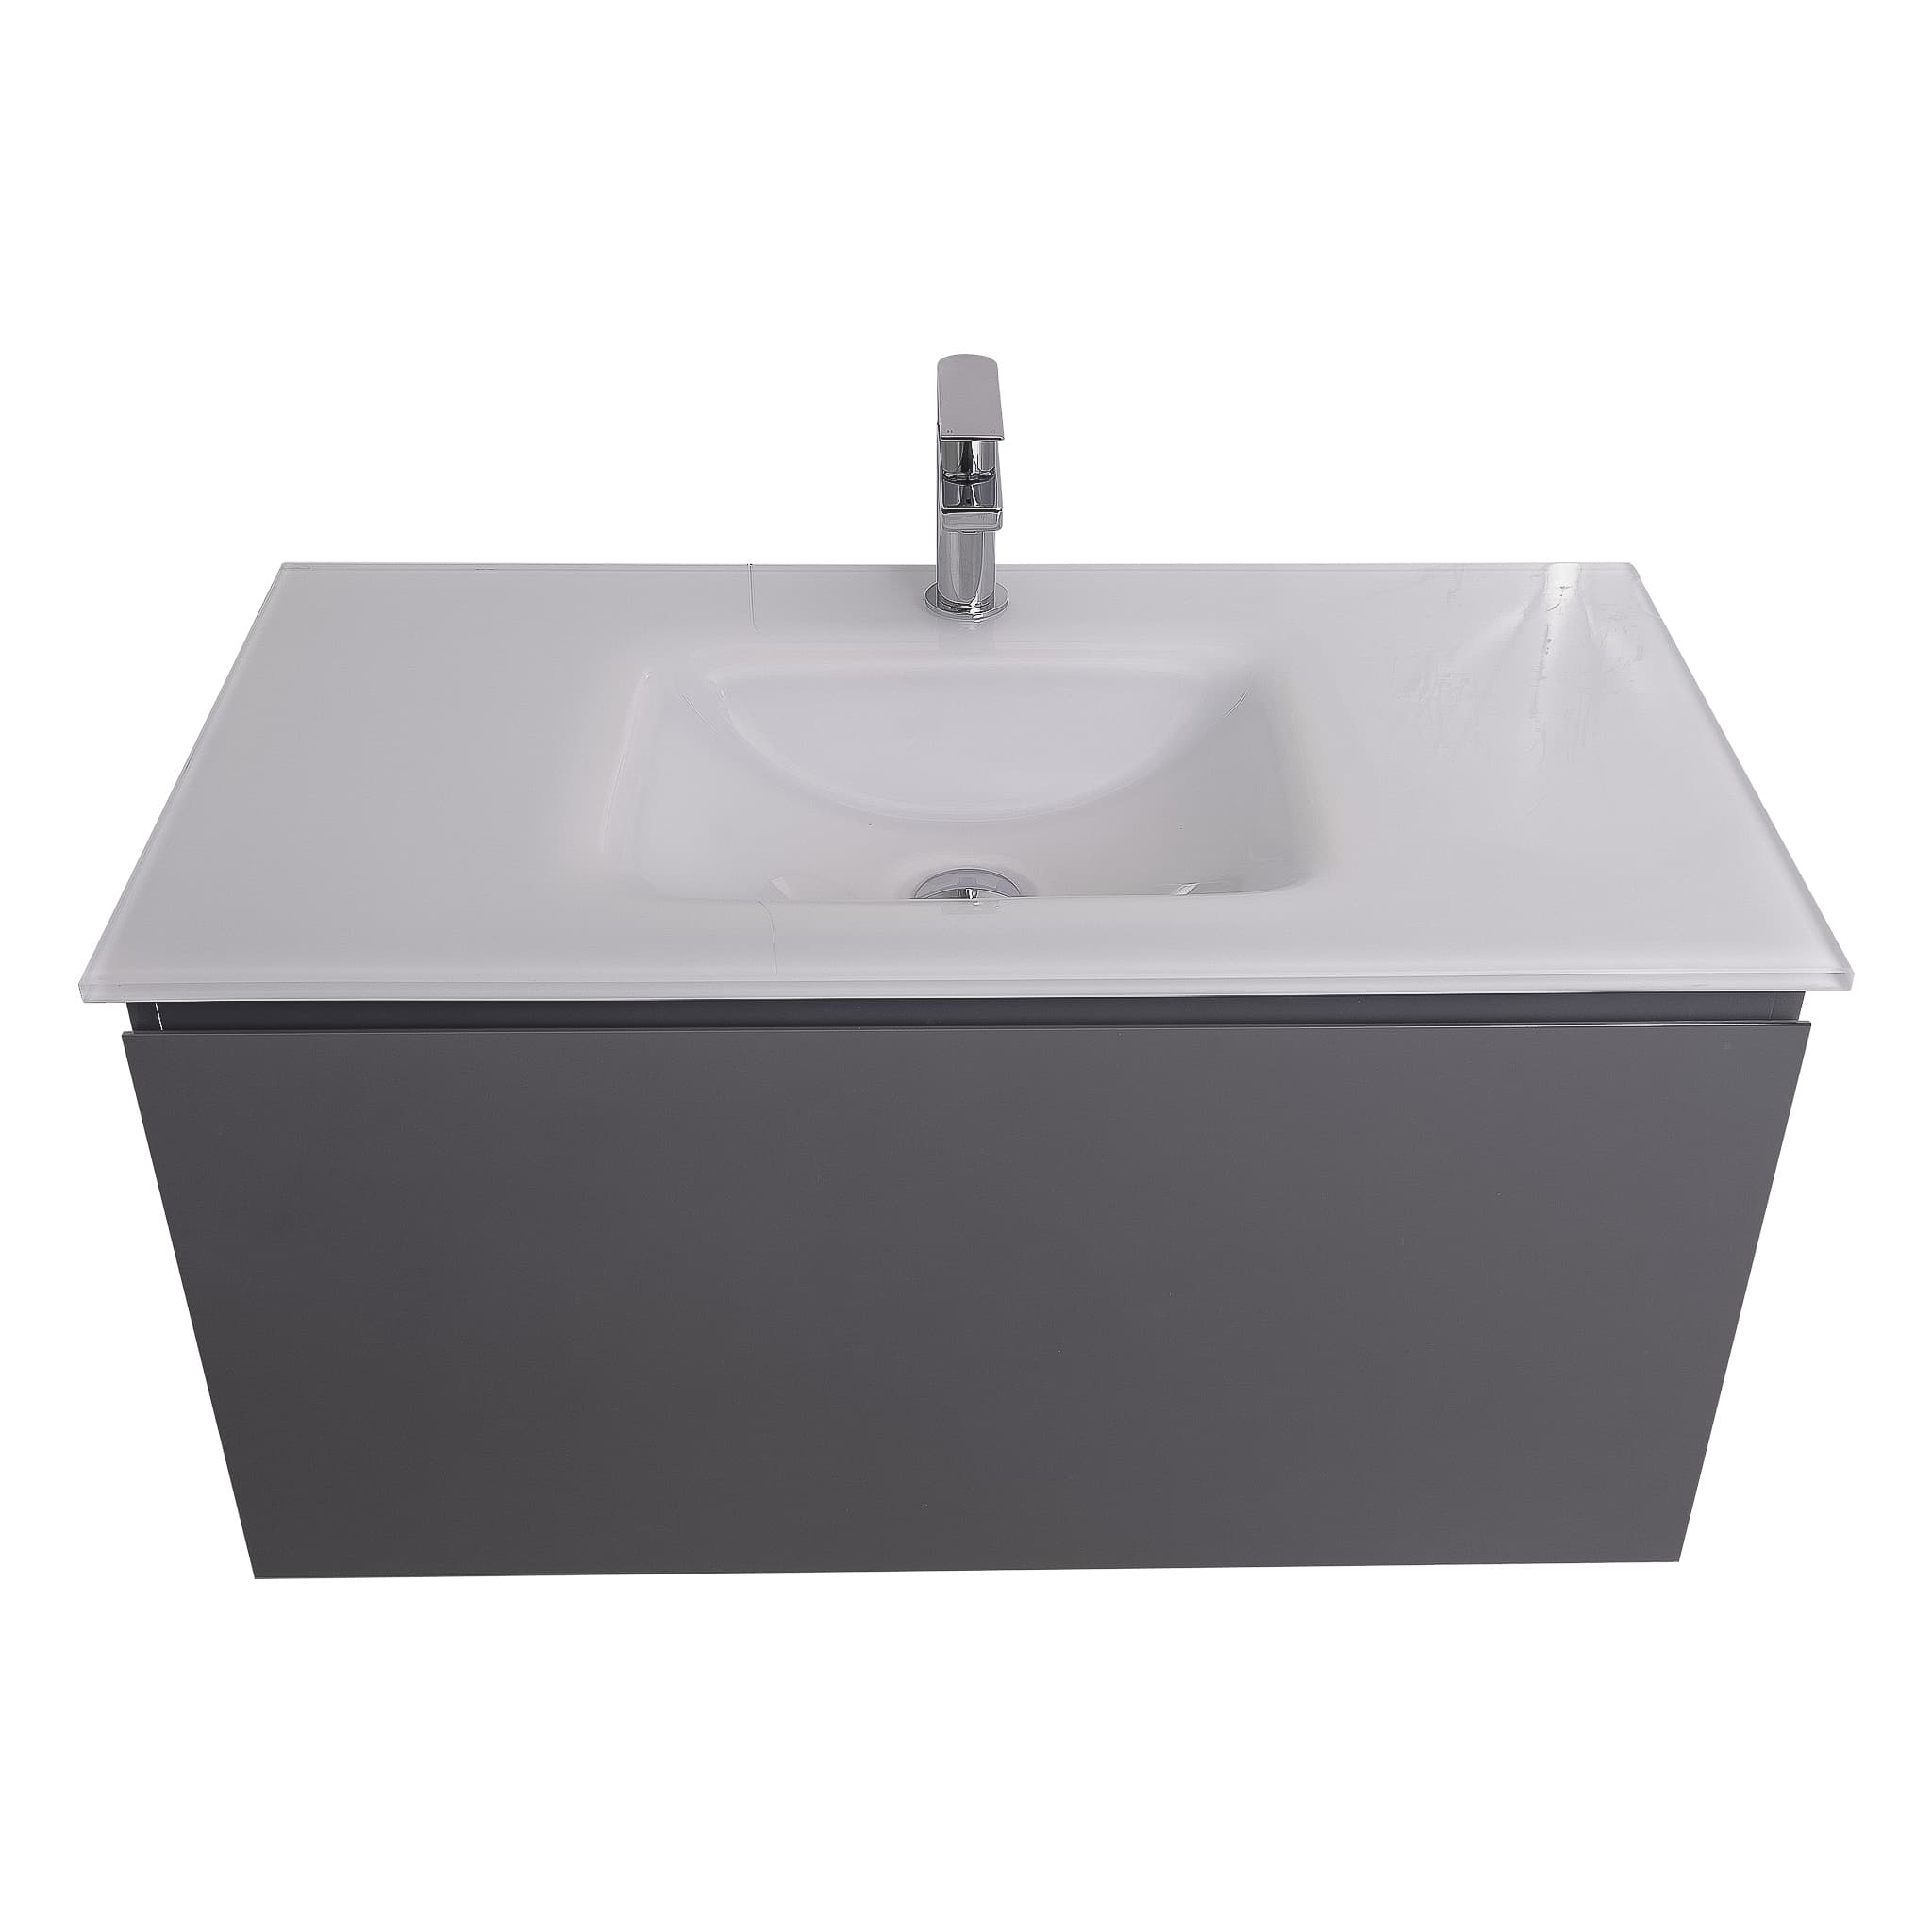 Venice 31.5 Anthracite High Gloss Cabinet, White Tempered Glass Sink, Wall Mounted Modern Vanity Set